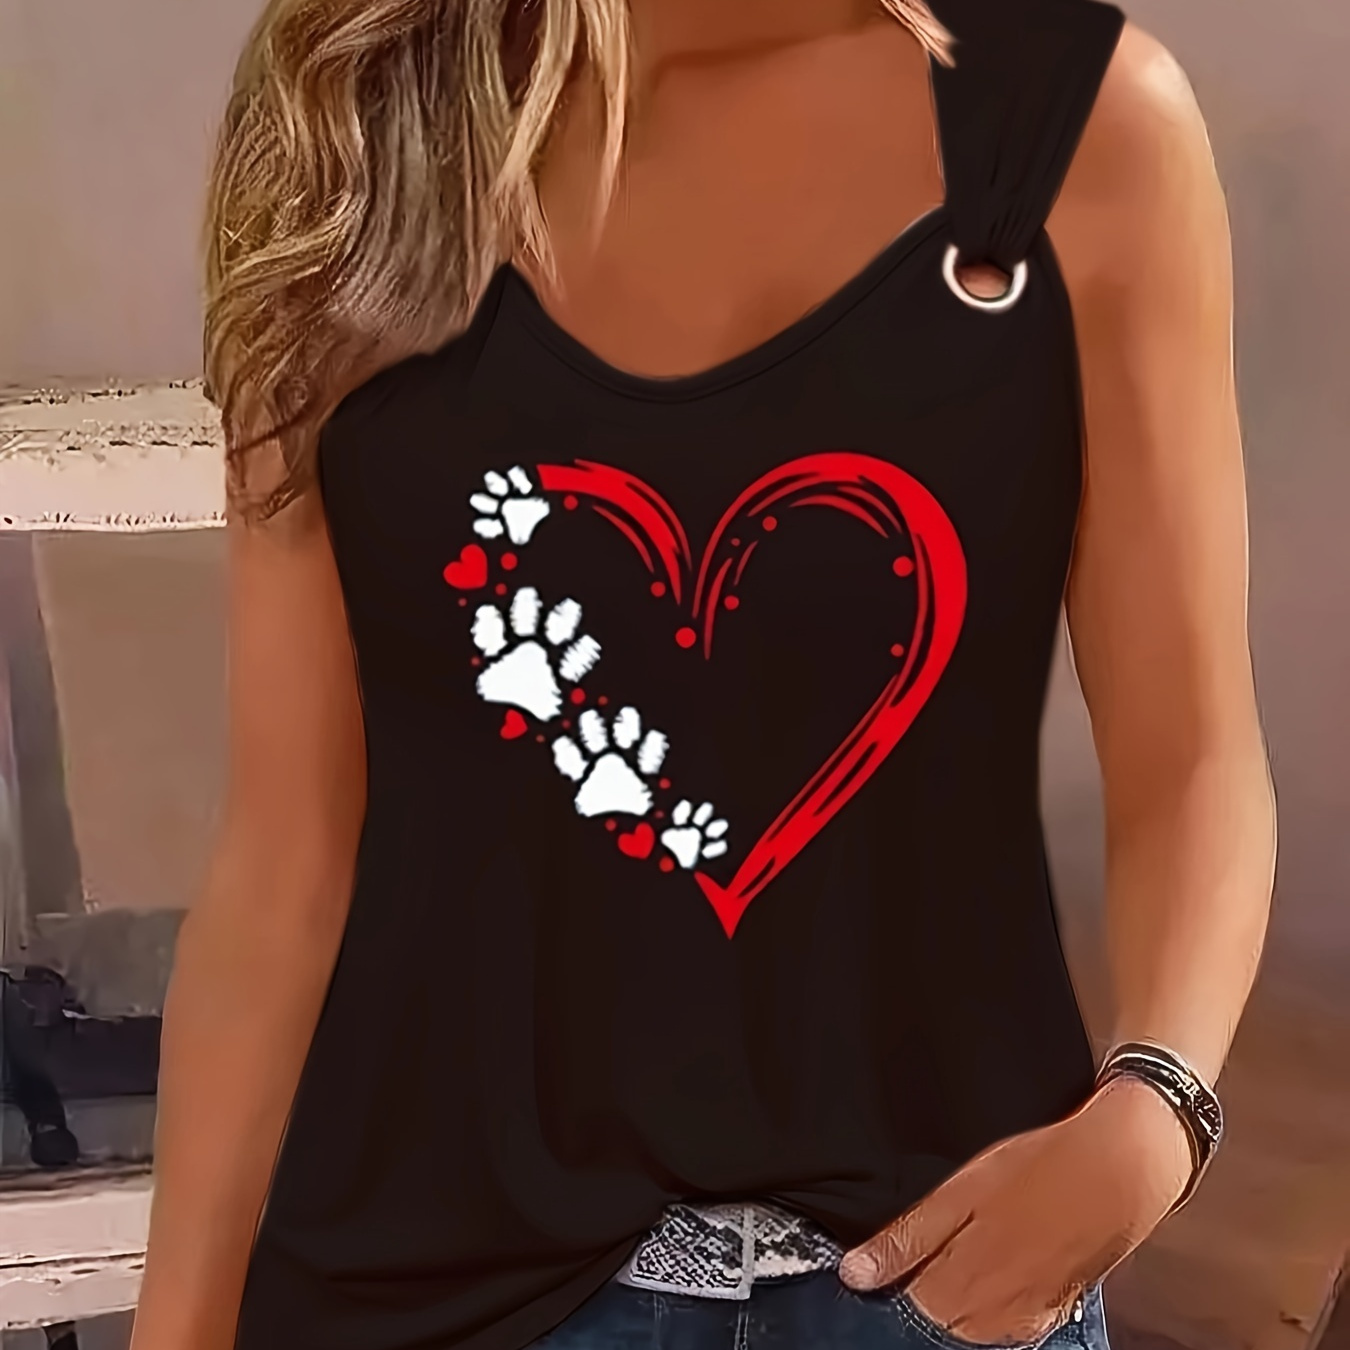 

Heart & Paw Print Ring Detail Tank Top, Casual Sleeveless Round Neck Top, Women's Clothing, Valentine's Day